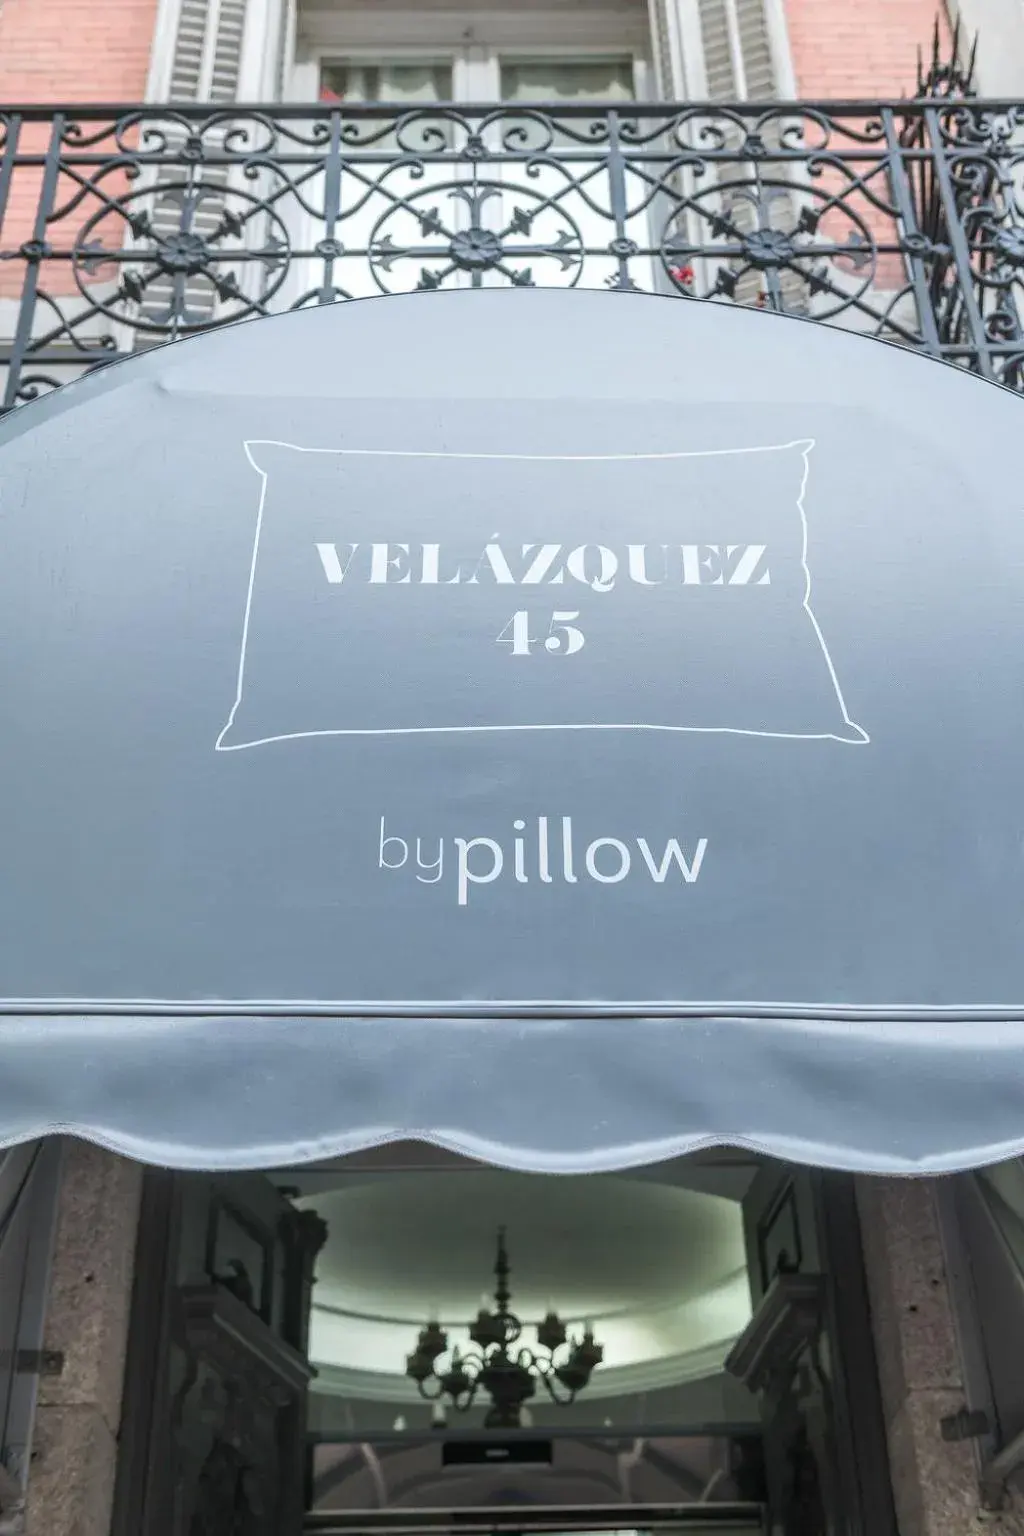 Property building in BYPILLOW Velázquez 45